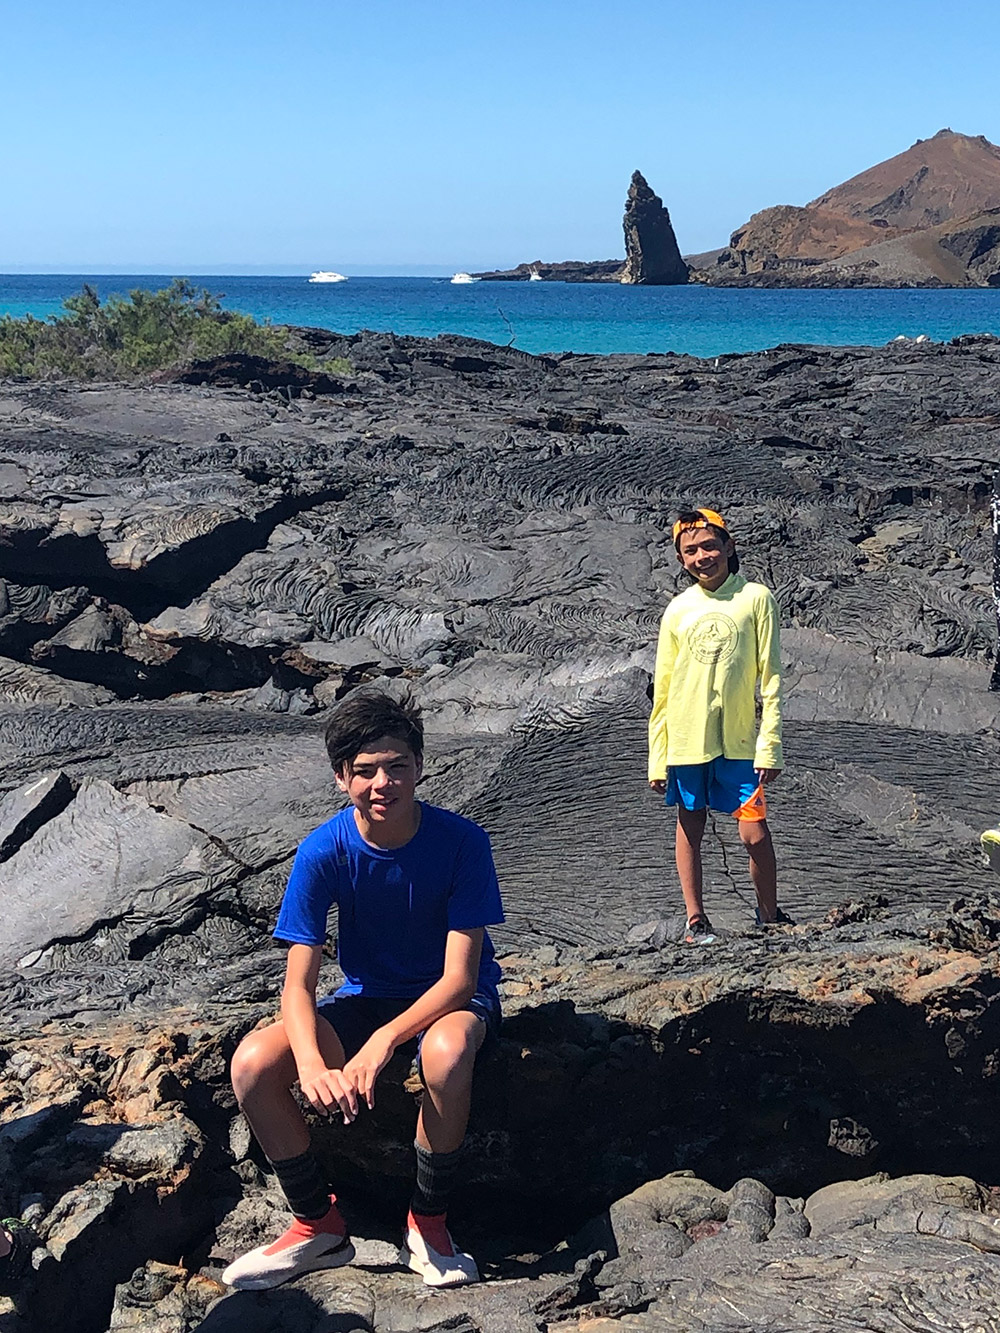 Oliver and his big brother Sebastien go for a hike on Santa Cruz Island, which was full of black rocks. July, 2019